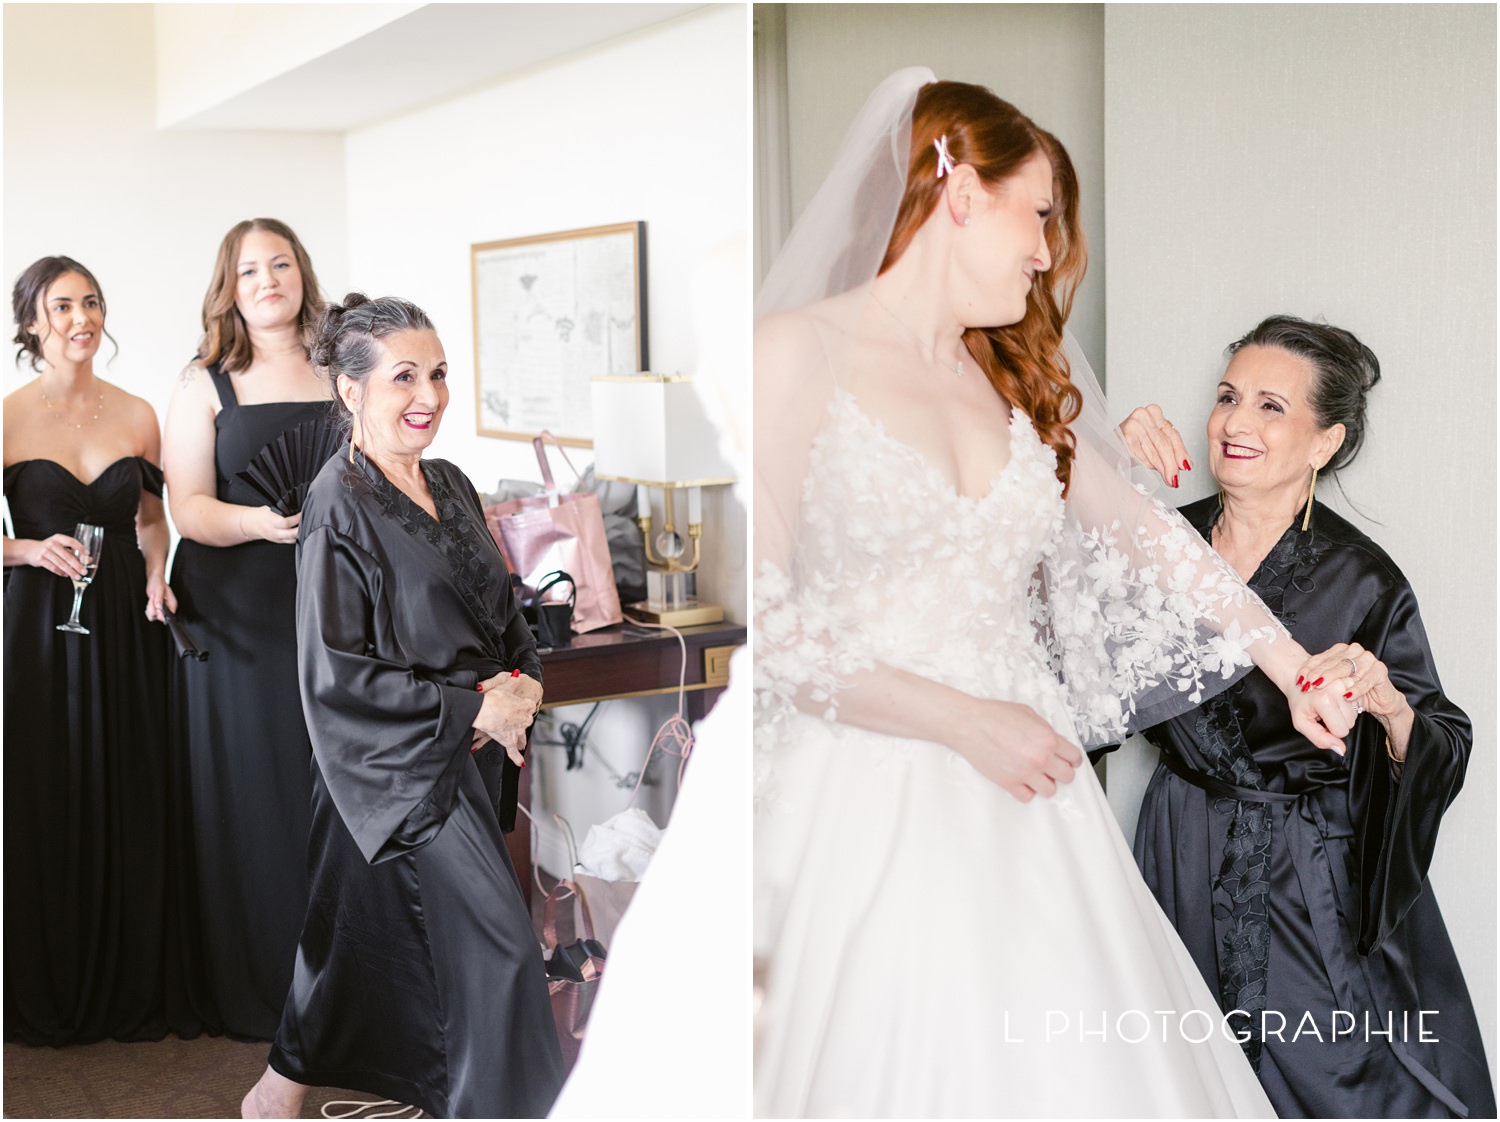 brazilian groom,bride getting ready at the chase park plaza,bride with red hair,catering st. louis wedding,forest park reception venue,jane,marcio,trolley room ceremony set up at the visitor's center in forest park,trolley room wedding reception,